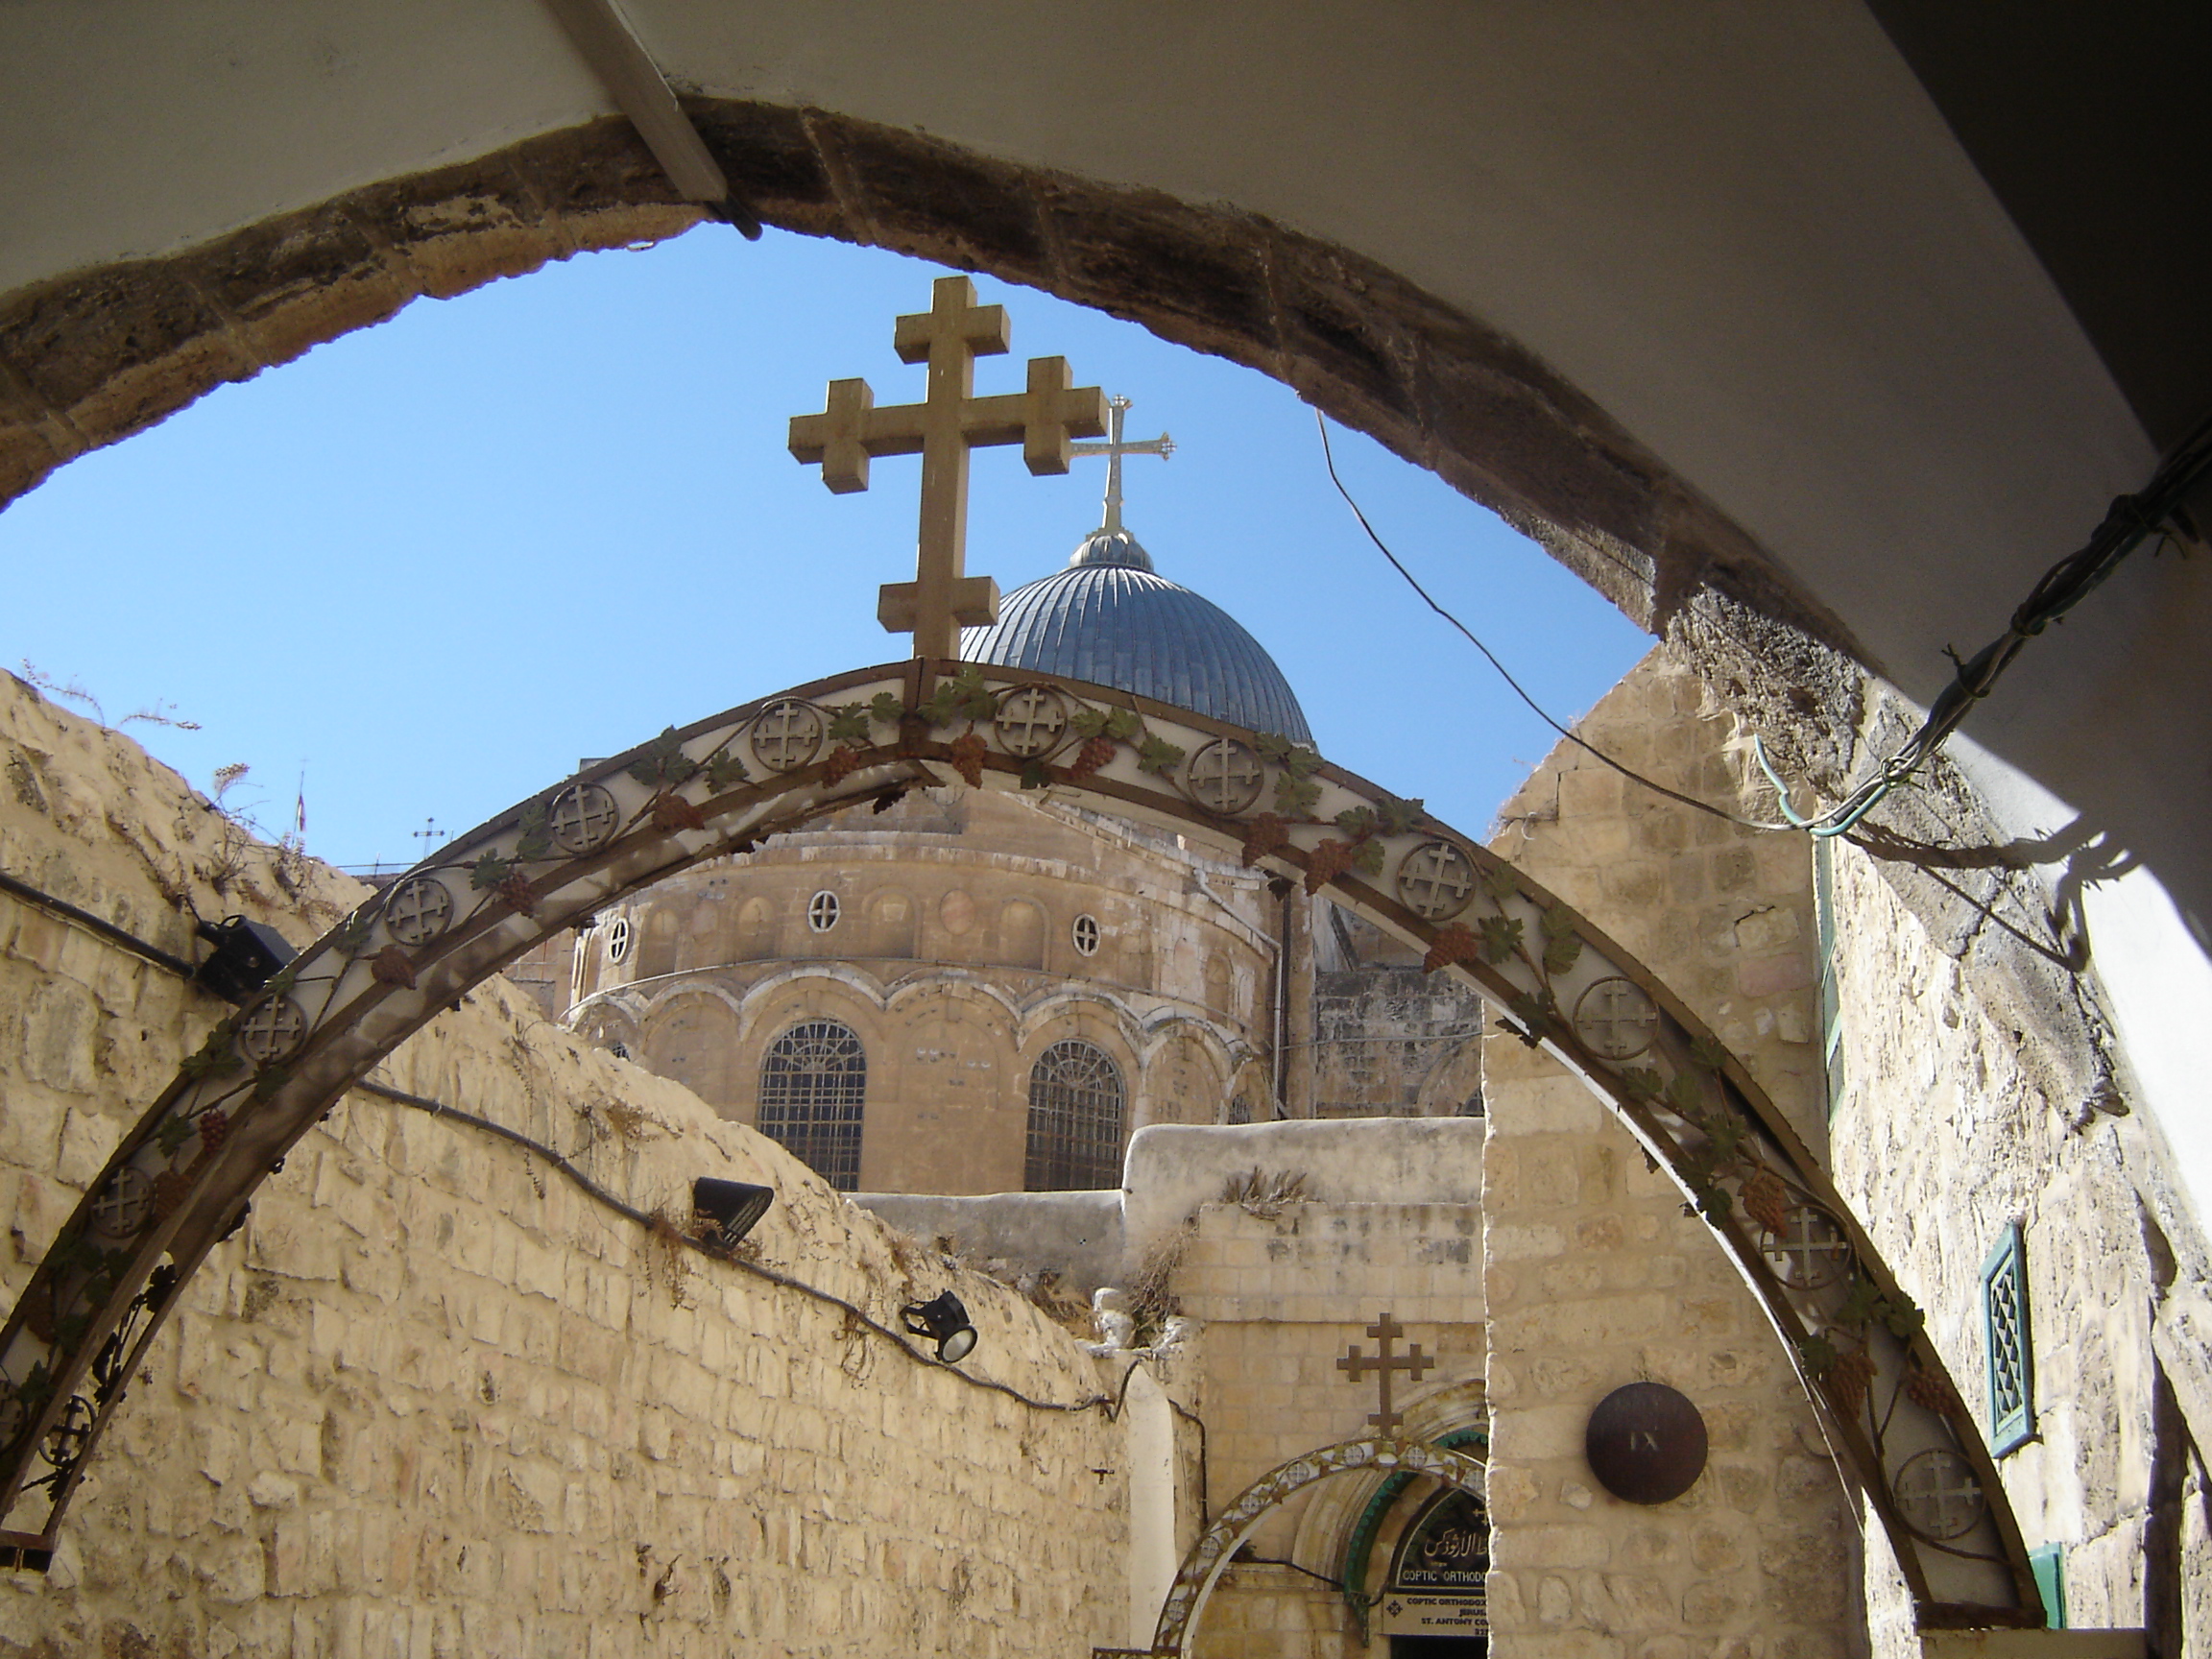 Via Dolorosa and the Road to the Crucifixion